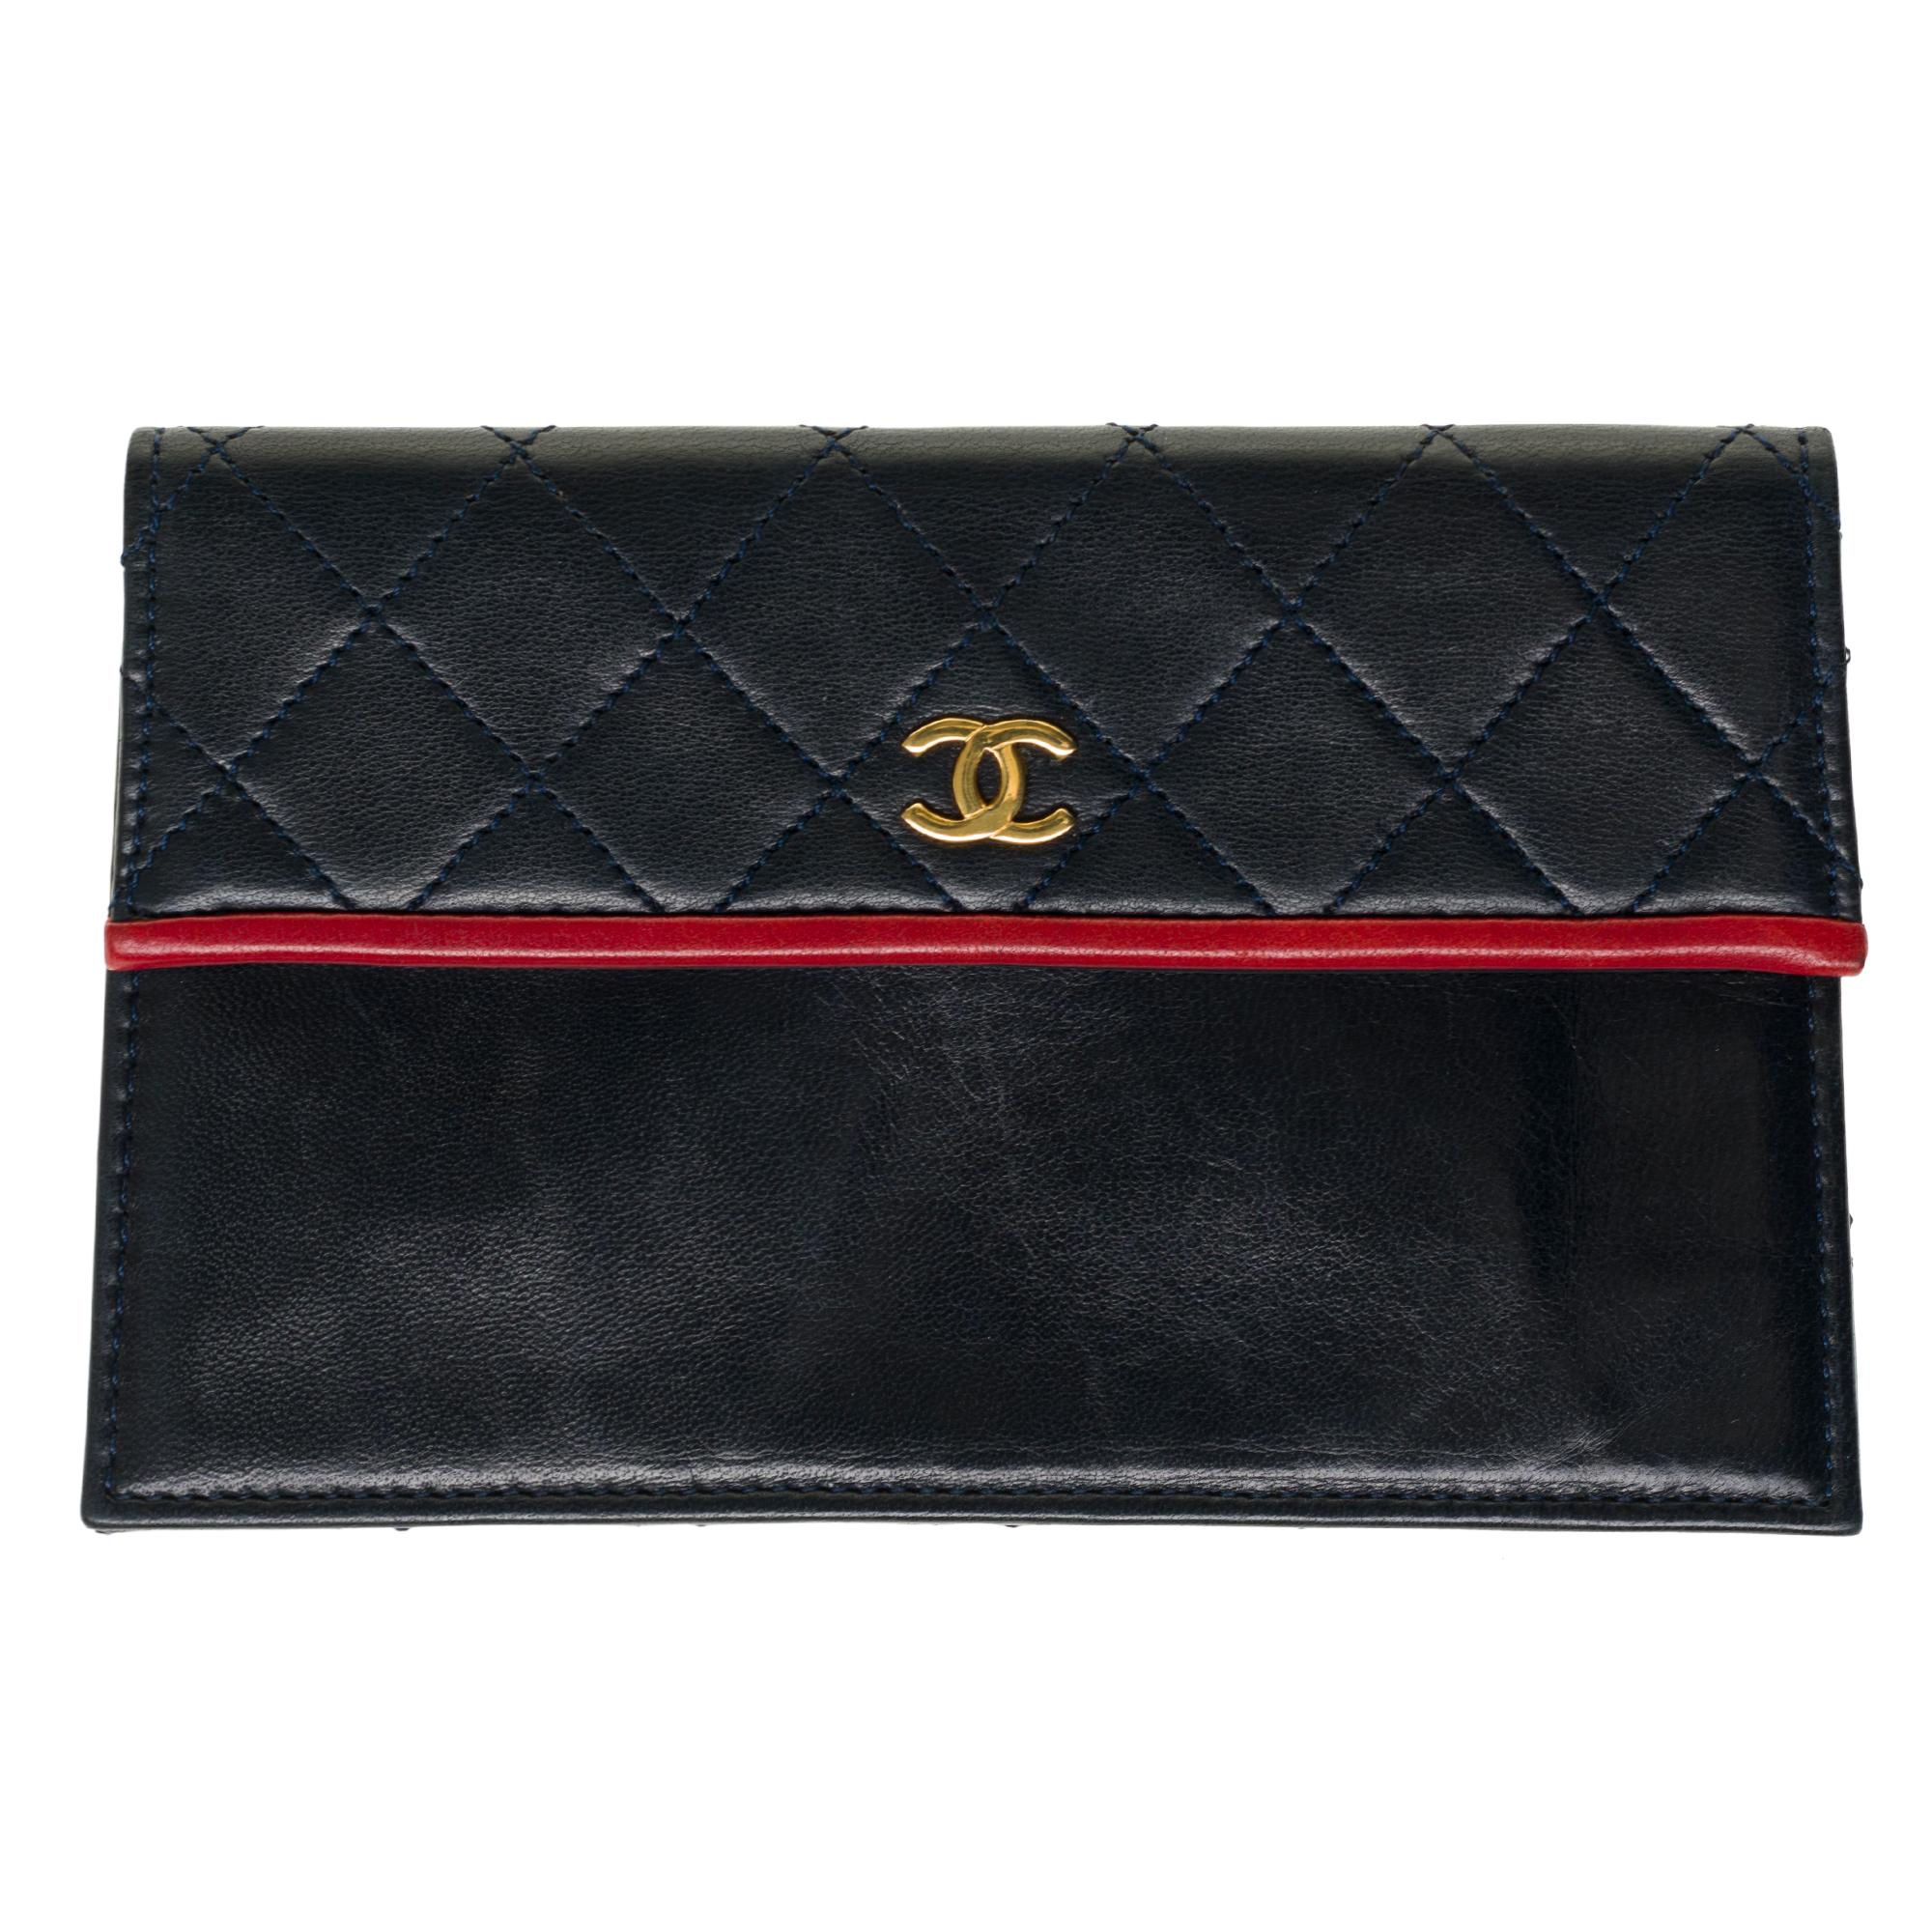 Chanel Trapezoidal shoulder flap bag in navy blue quilted lambskin leather, GHW 8